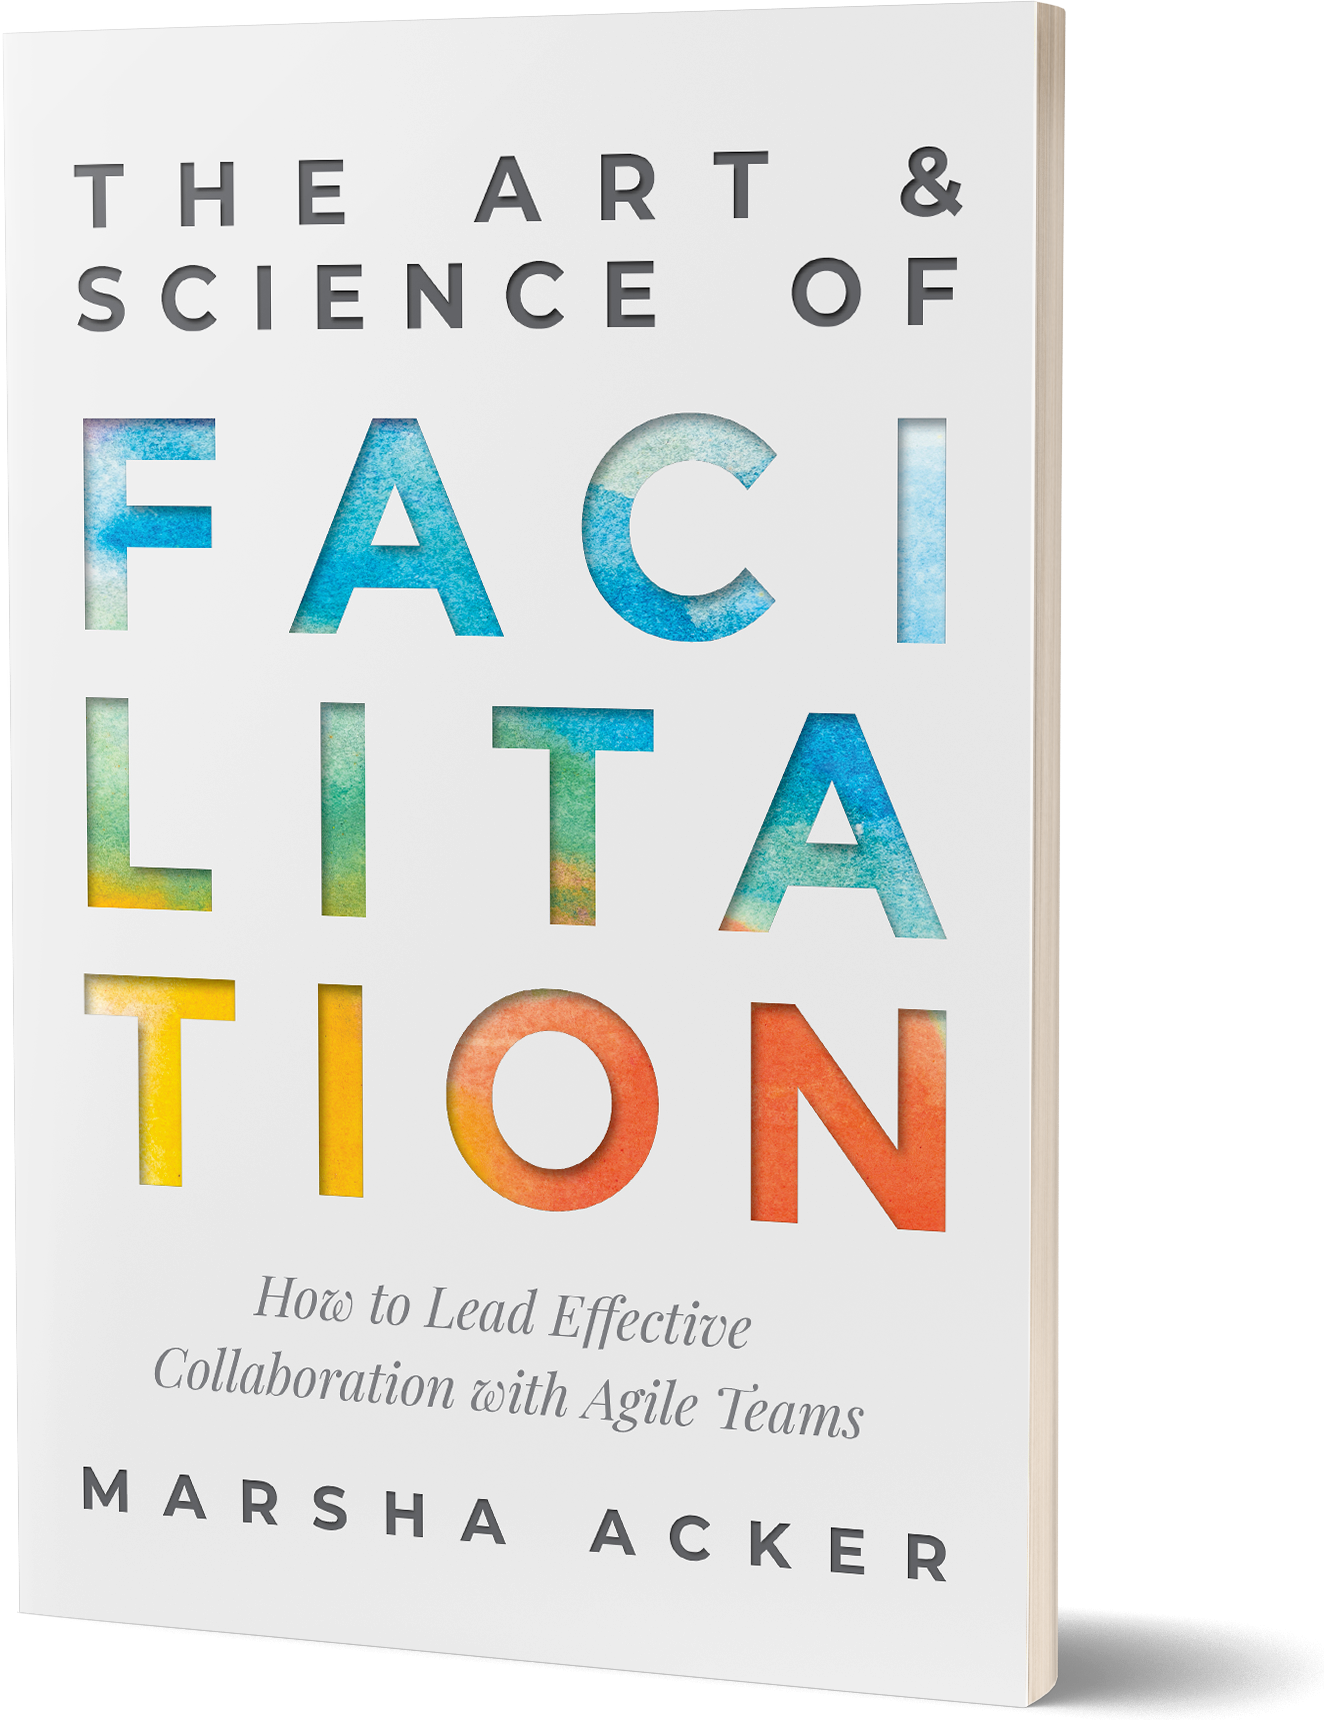 The Art and Science of Facilitation Book by Marsha Acker